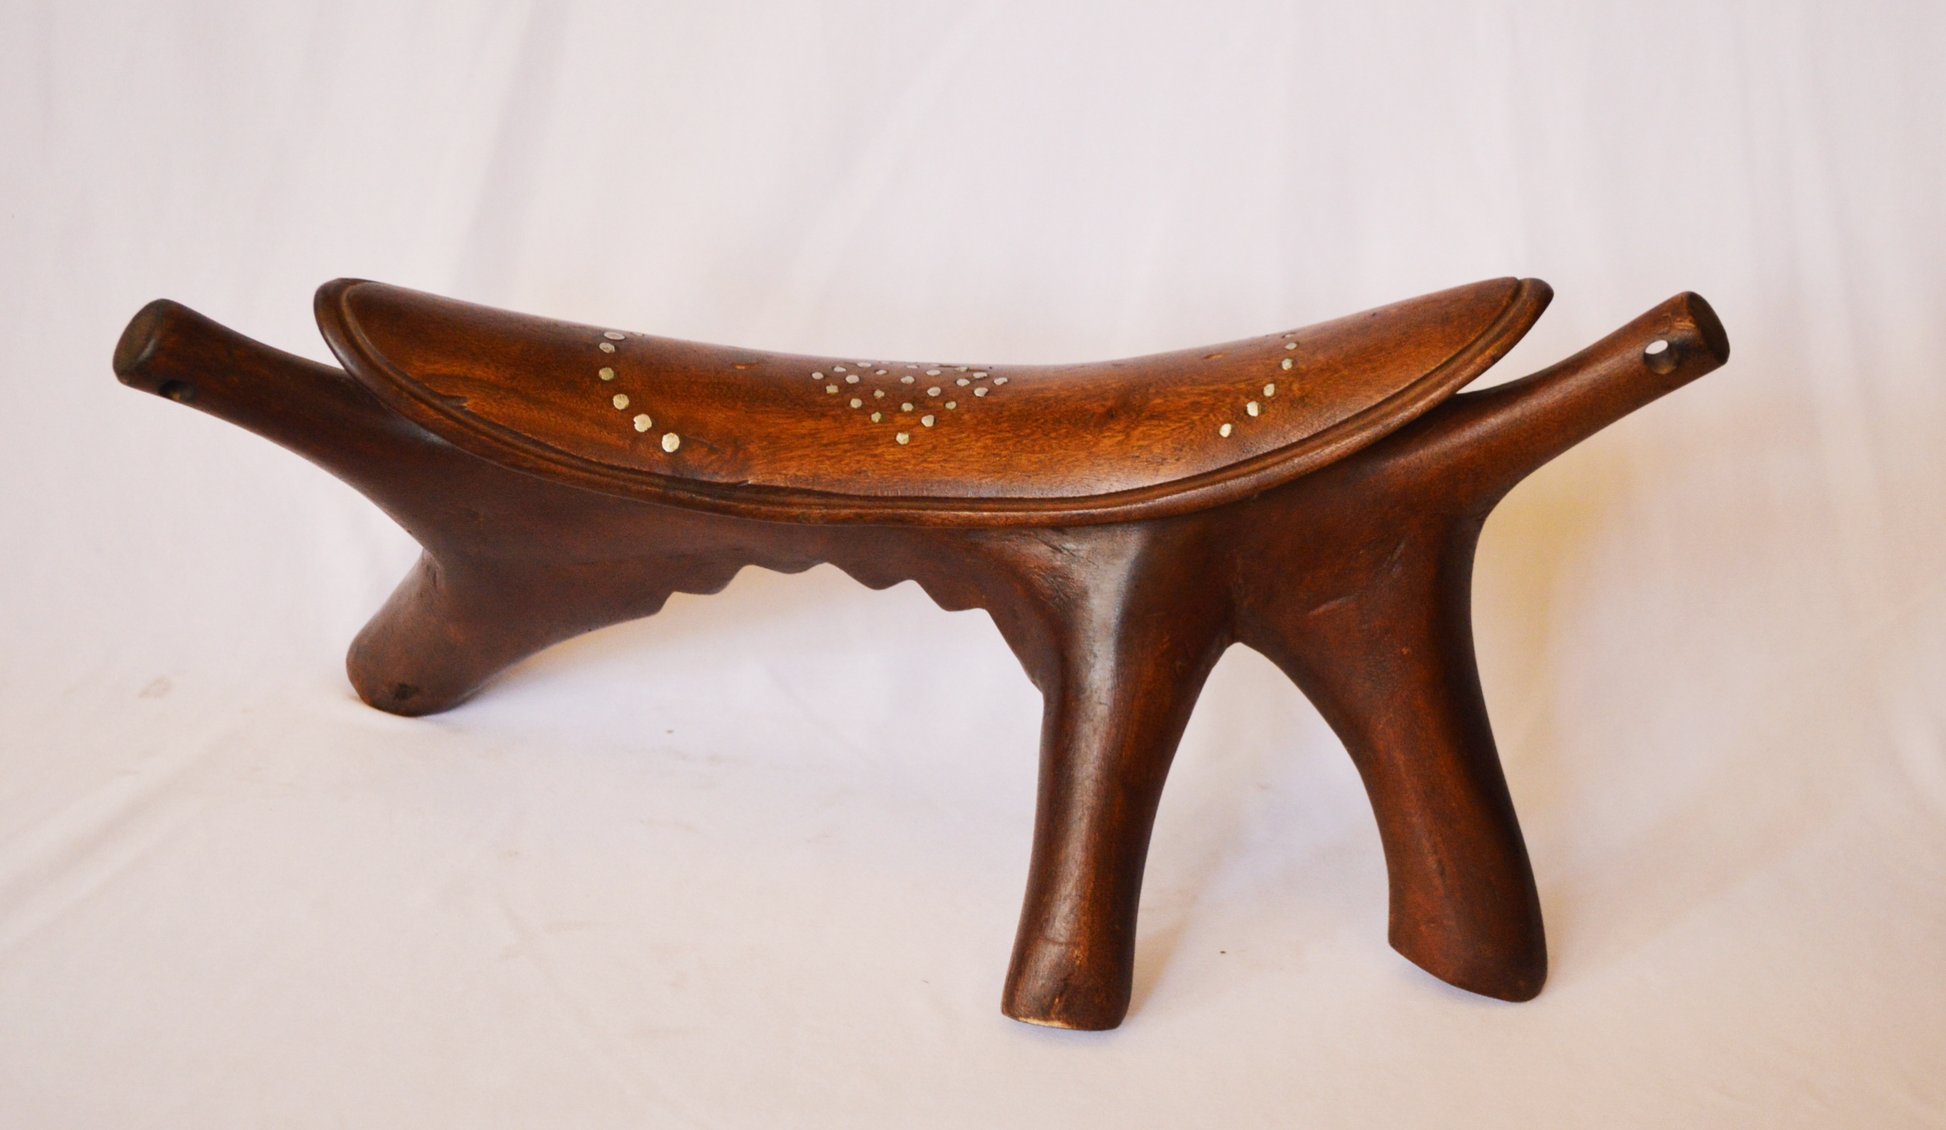 Dinka 3 legged Headrest - Authentic African handicrafts | Clothing, bags, painting, toys & more - CULTURE HUB by Muthoni Unchained